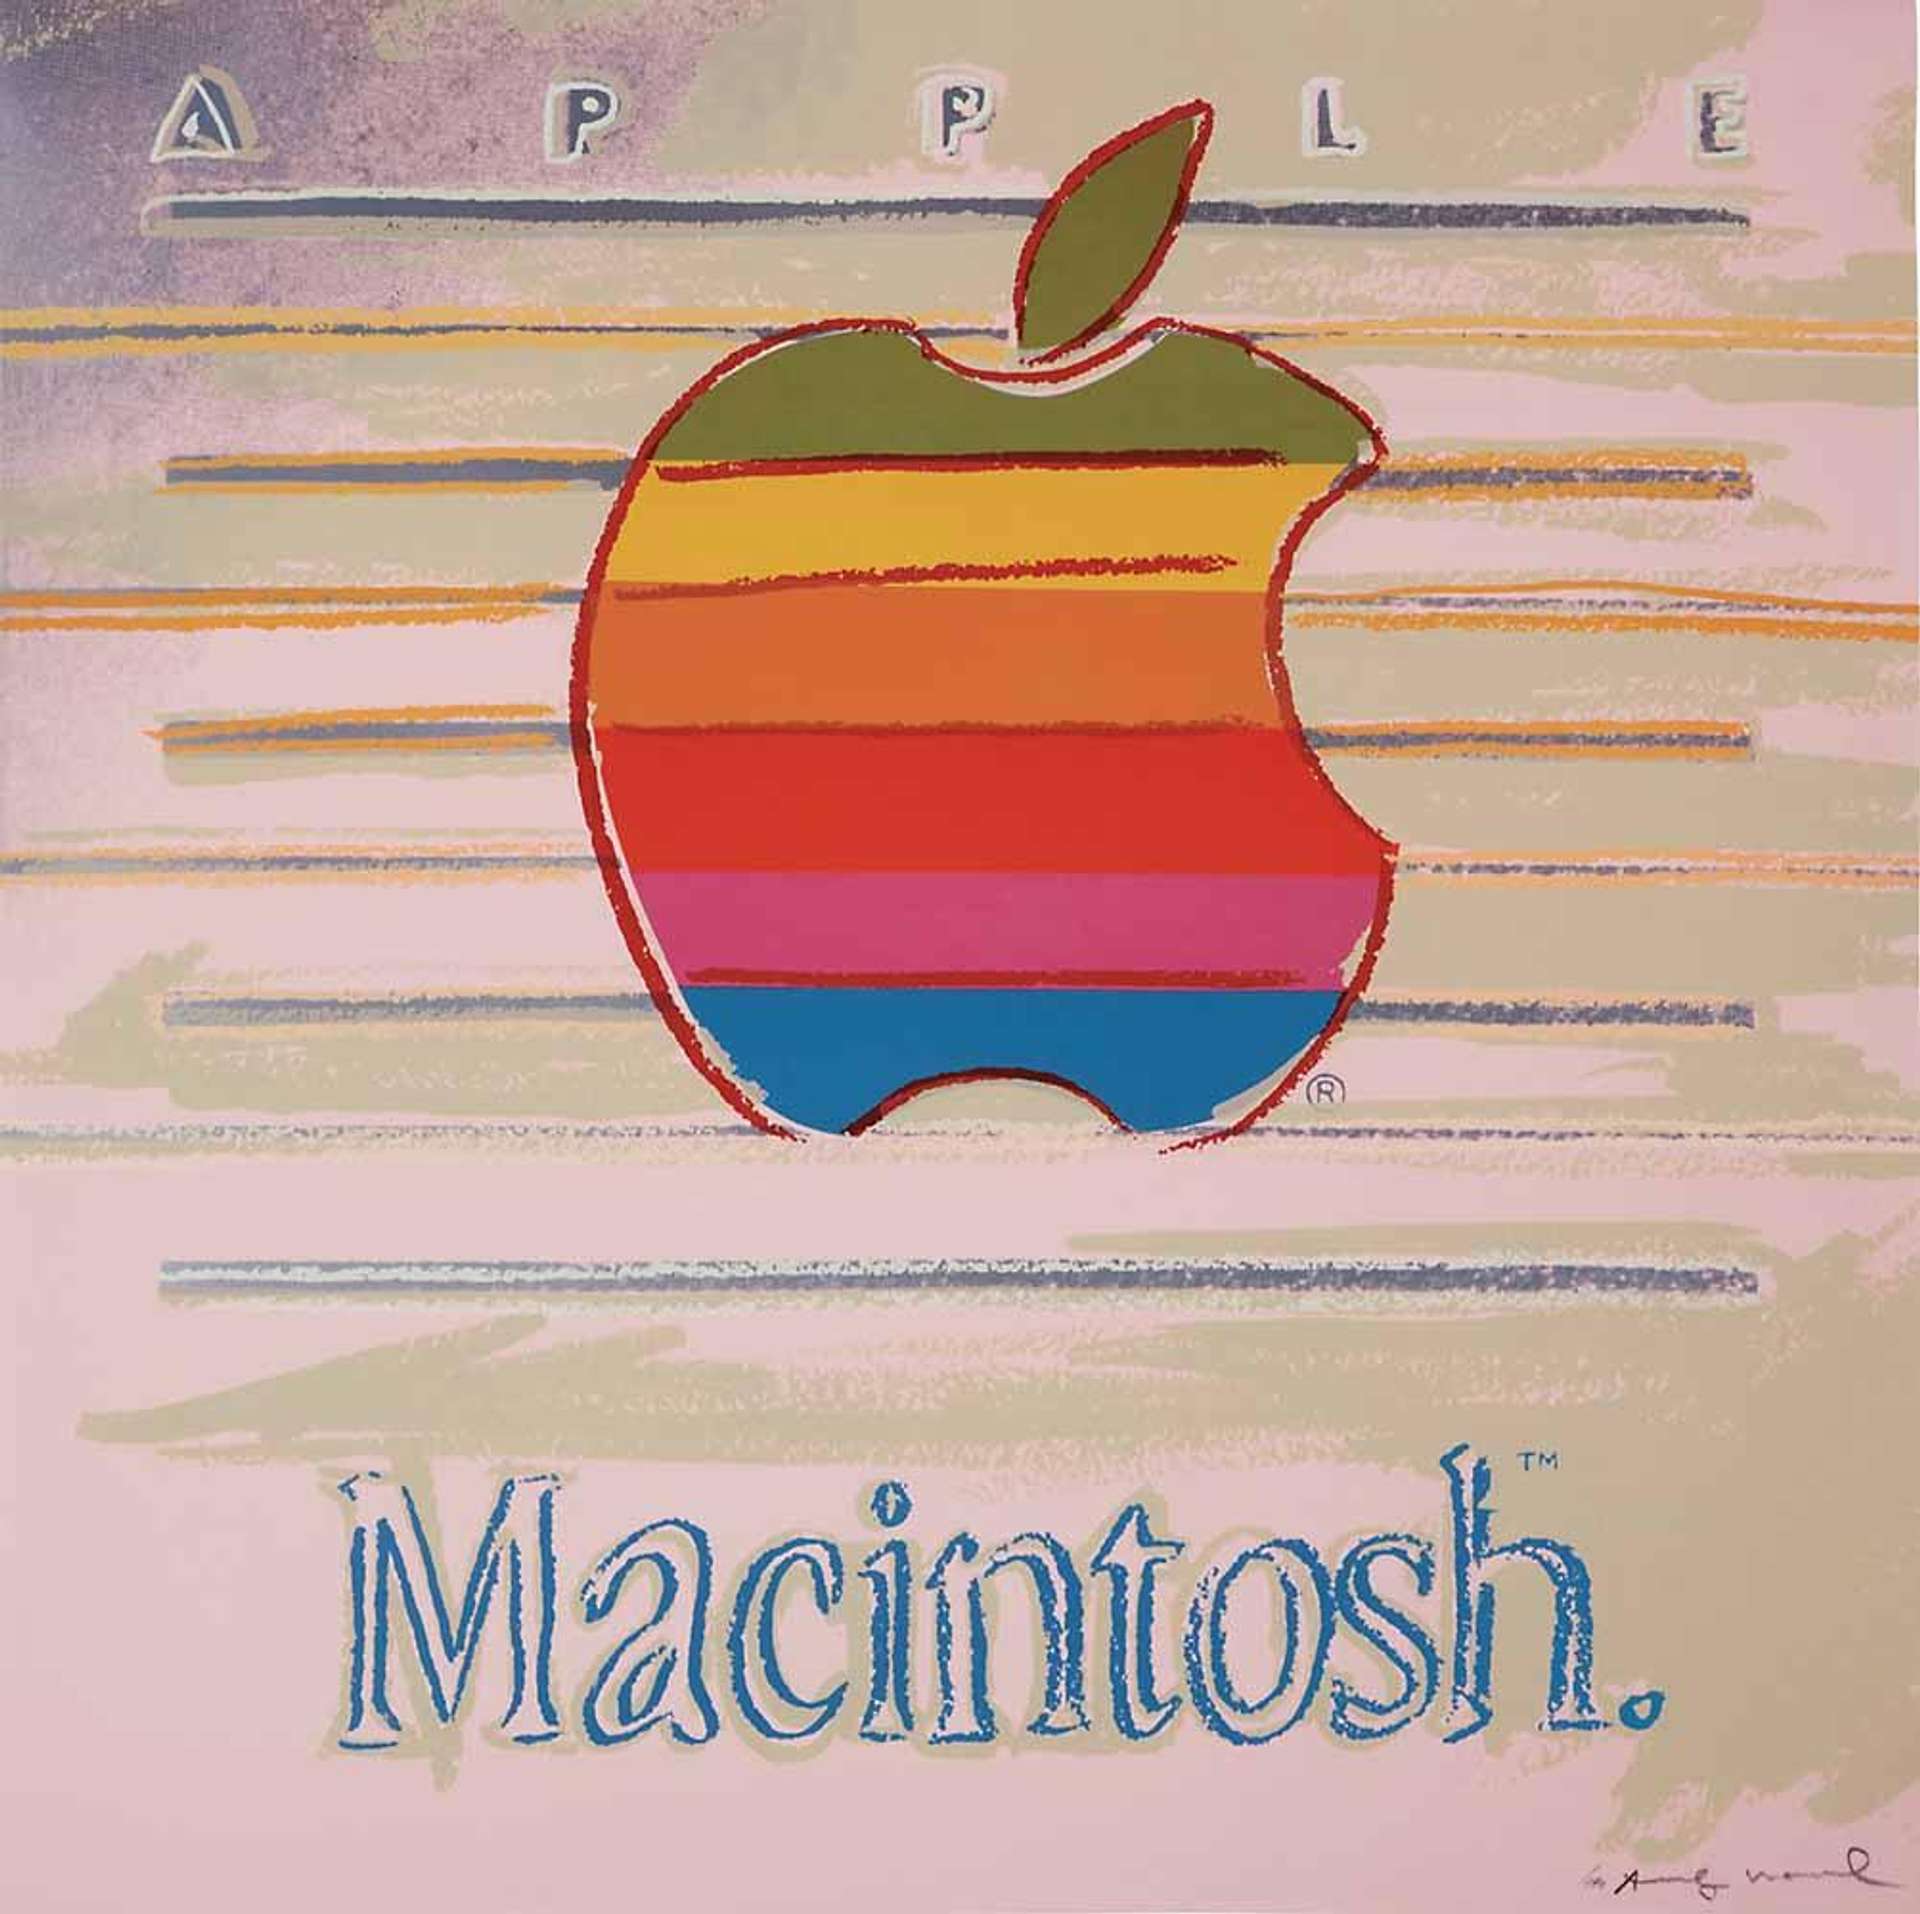 Printed in 1985, Apple (F. & S. II.359) is a screen print by Andy Warhol that captures his love for and obsession with consumer culture. This print features the multicoloured, striped Apple Macintosh logo, rendered against a pastel pink backdrop.